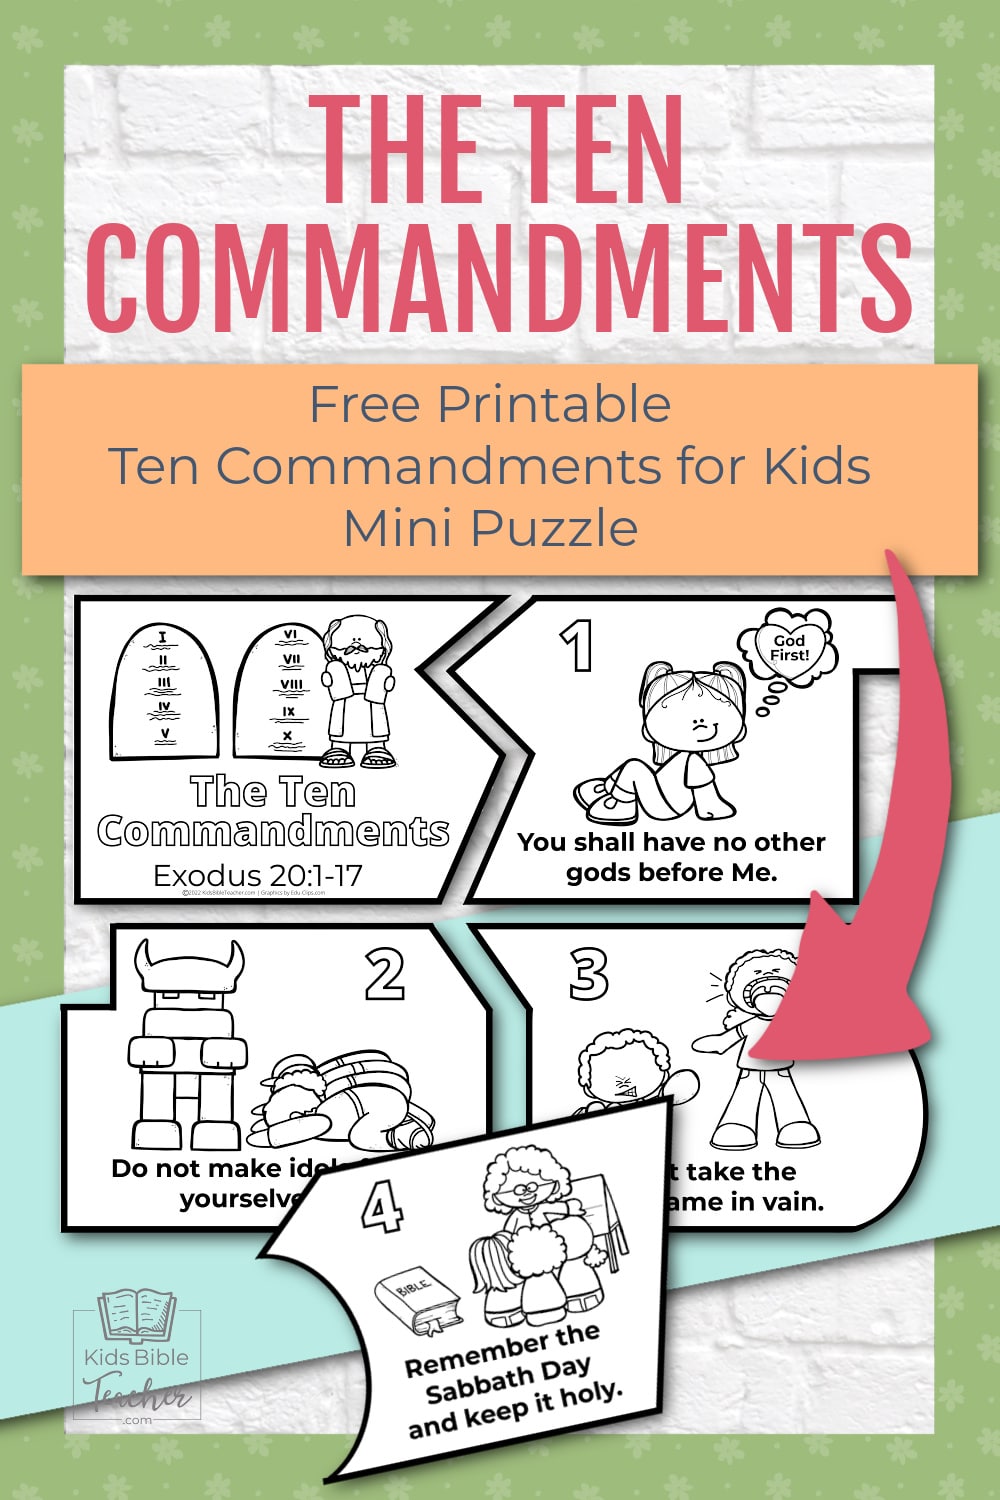 Are you looking for fun activities to teach the Ten Commandments for kids? Here is a super fun Mini Puzzle that your kids will love coloring and cutting out, then putting together over and over again.